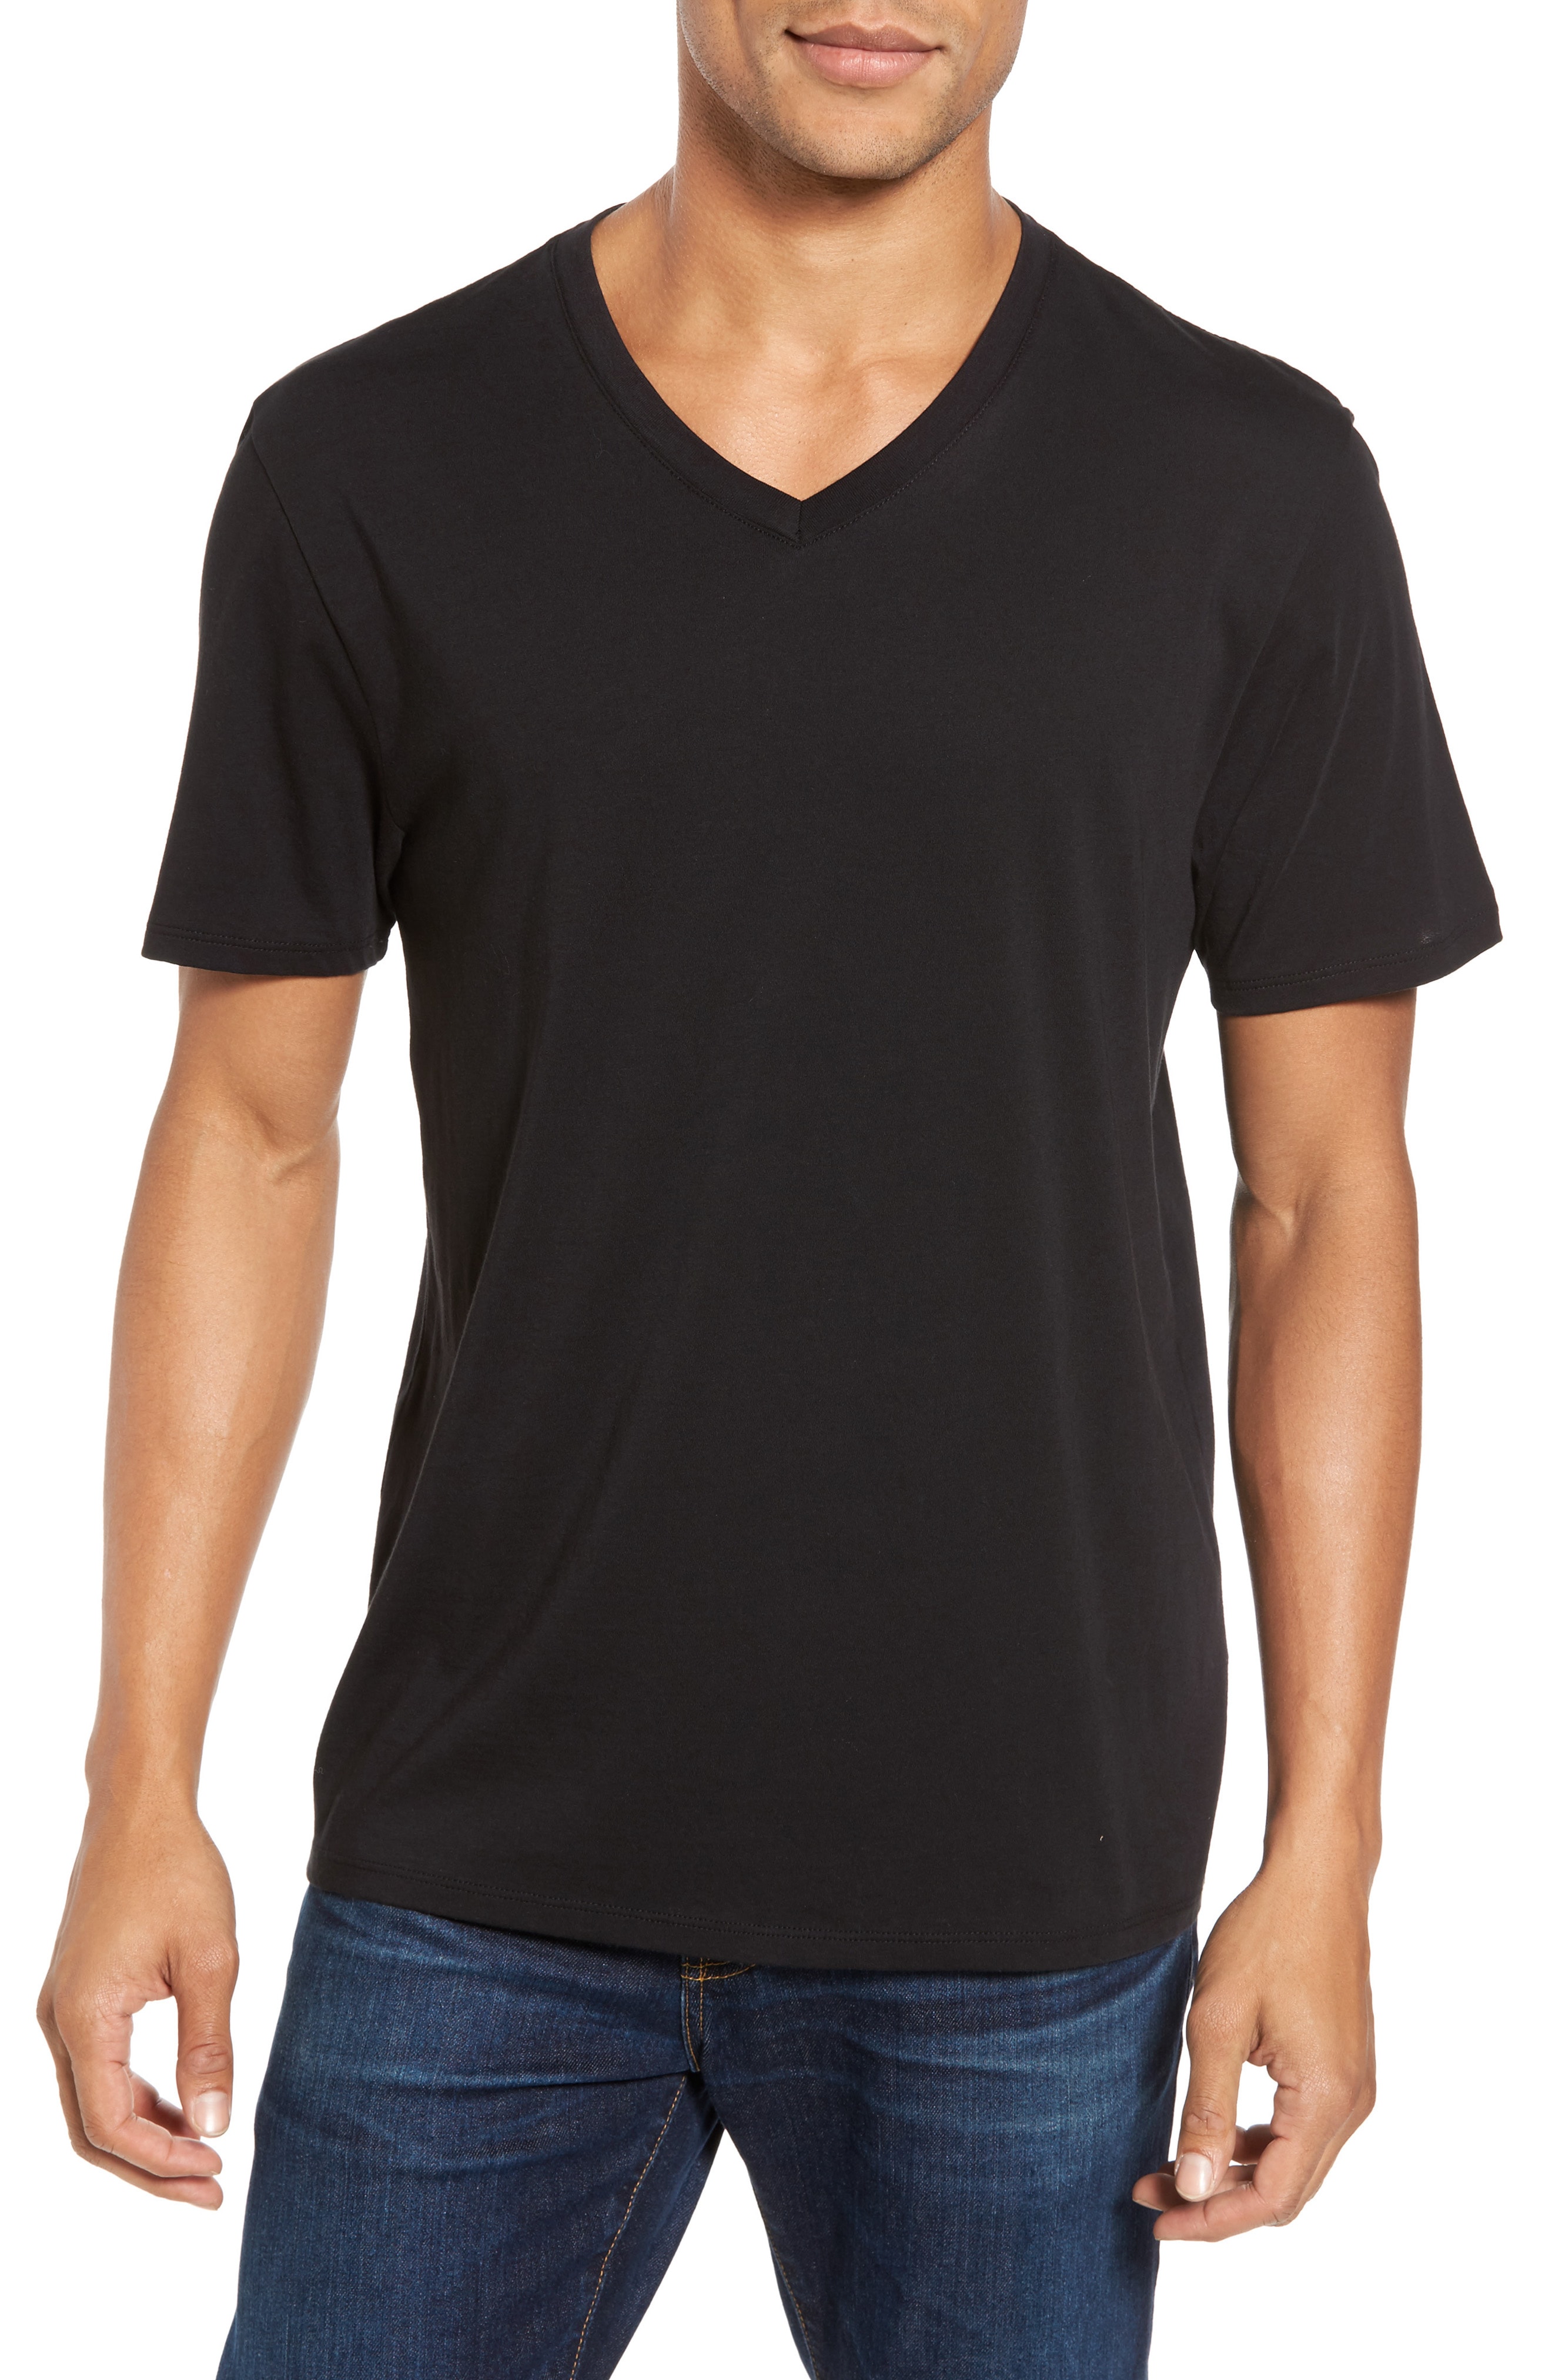 V neck shirts is a ways that specify your personality – thefashiontamer.com